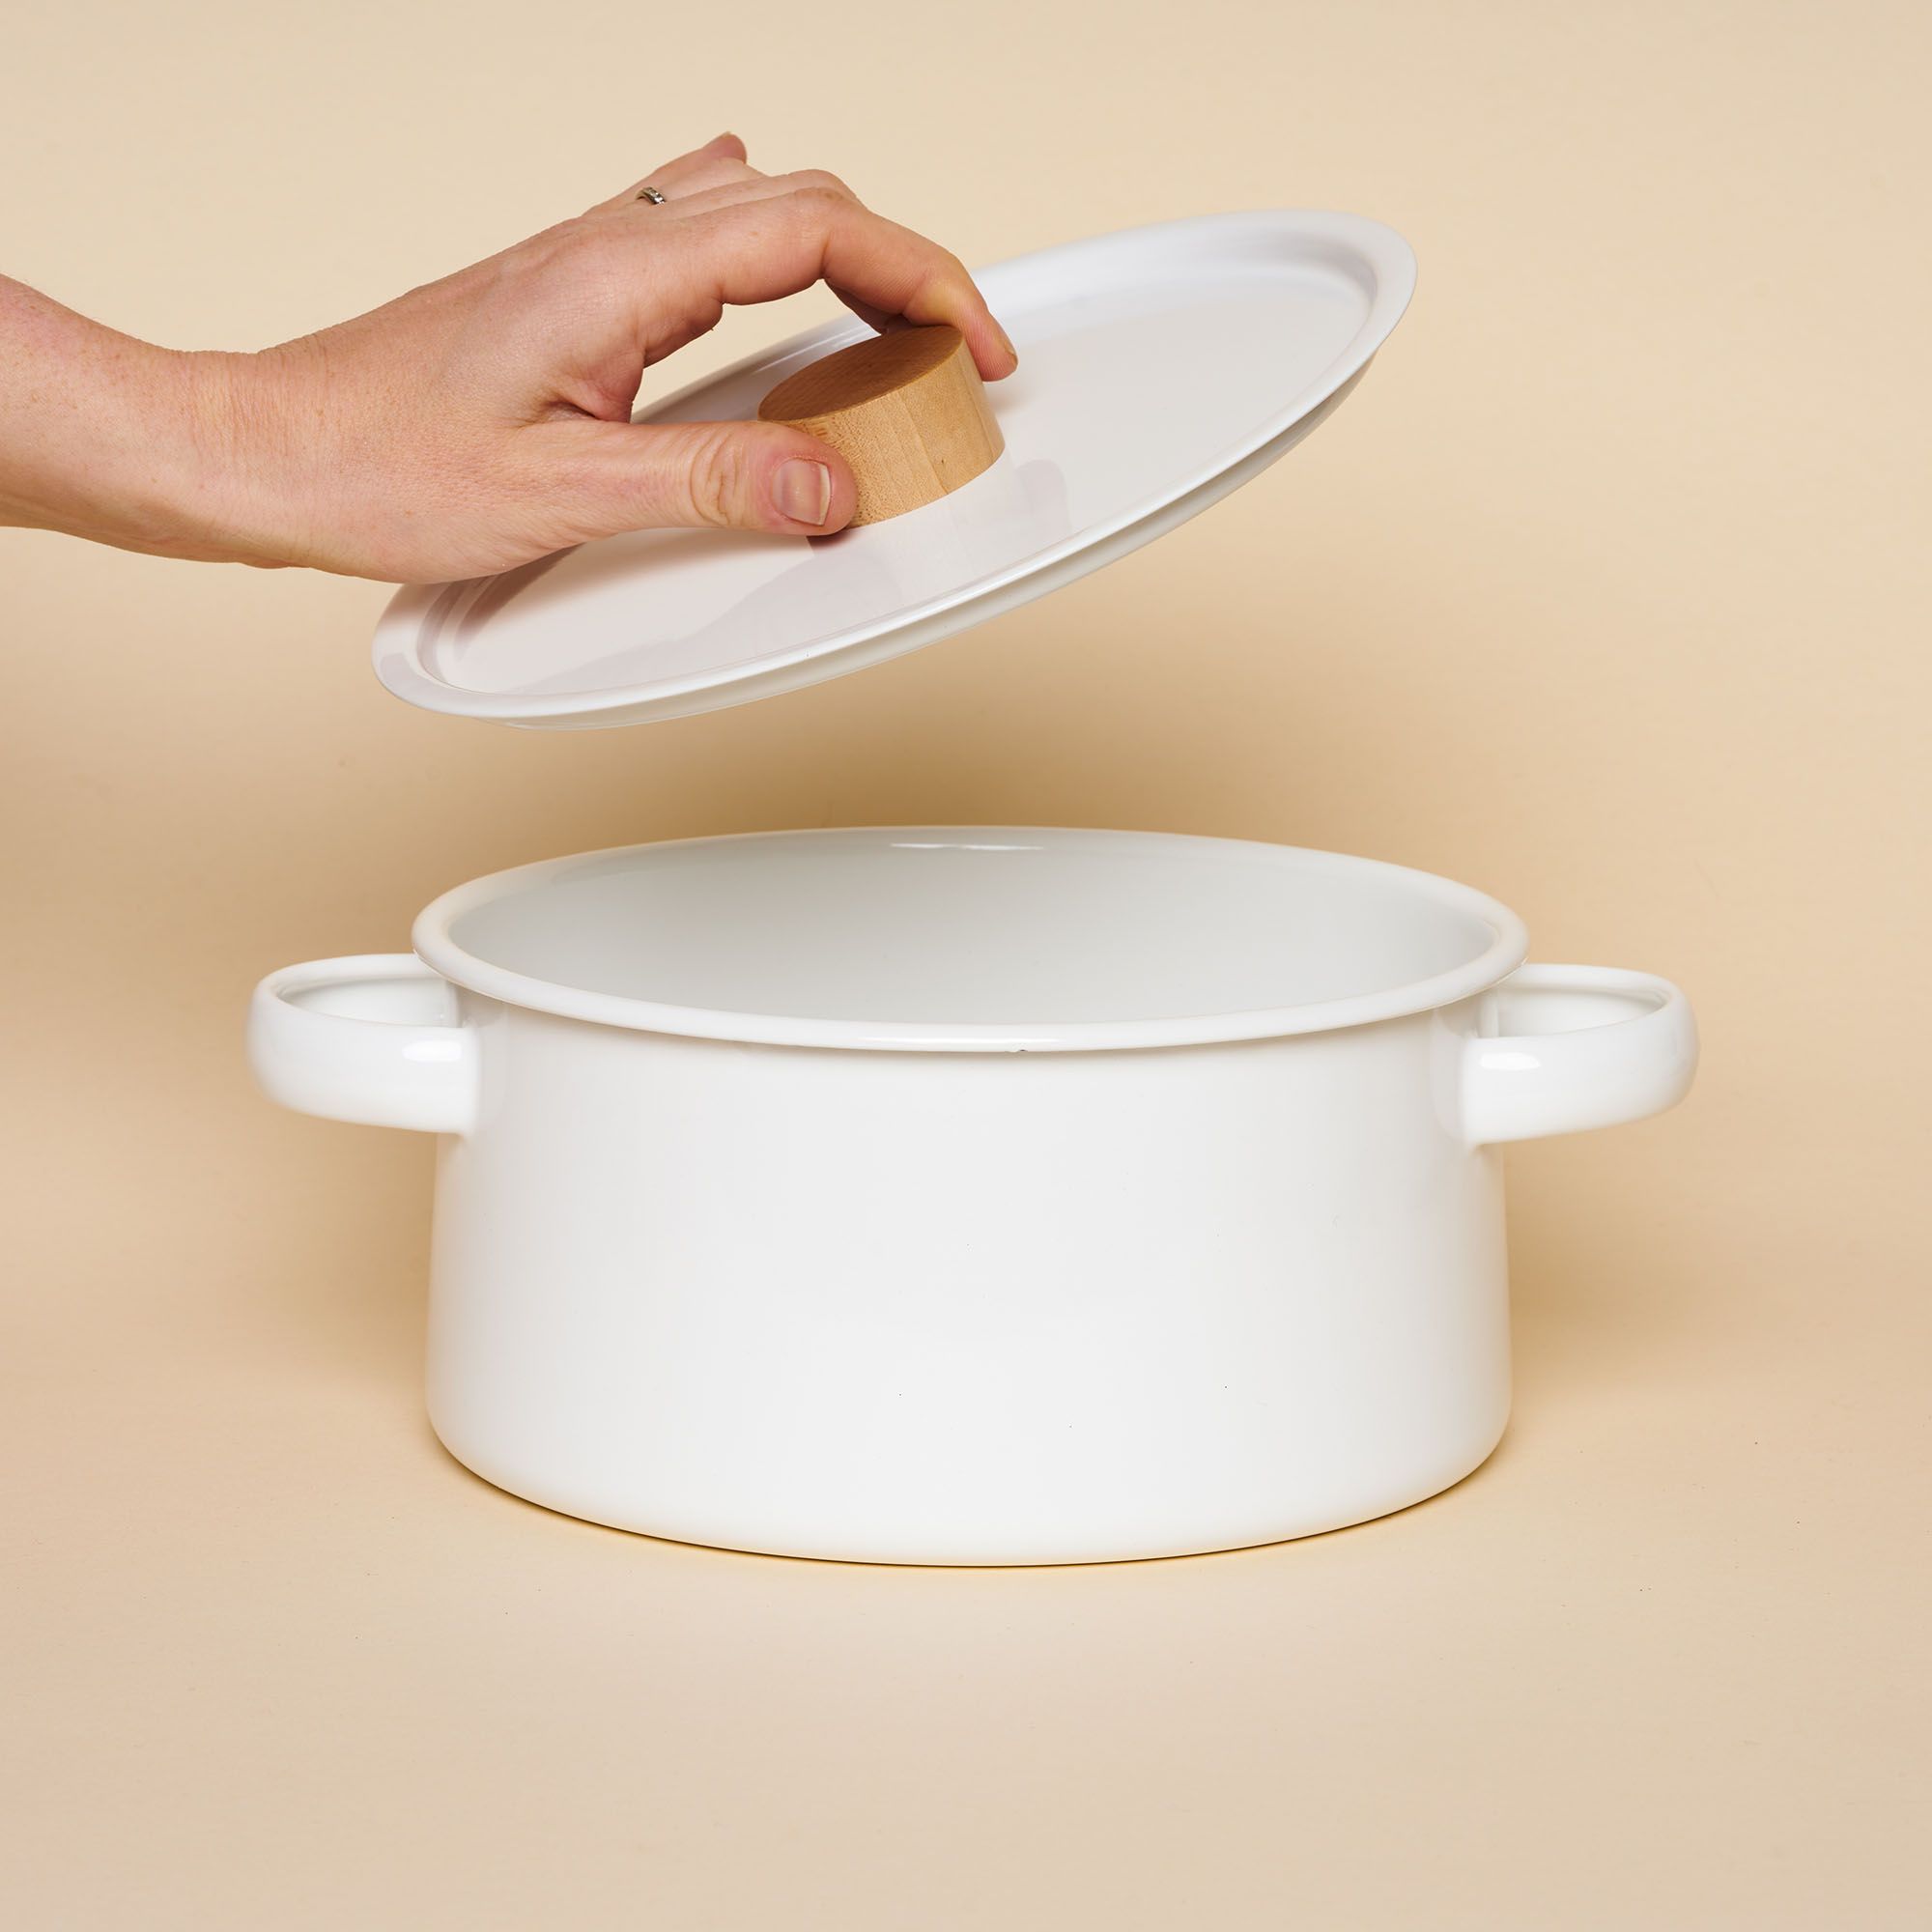 A white enamel pot with a tapered shape, handles on the side and light wooden handle on top.